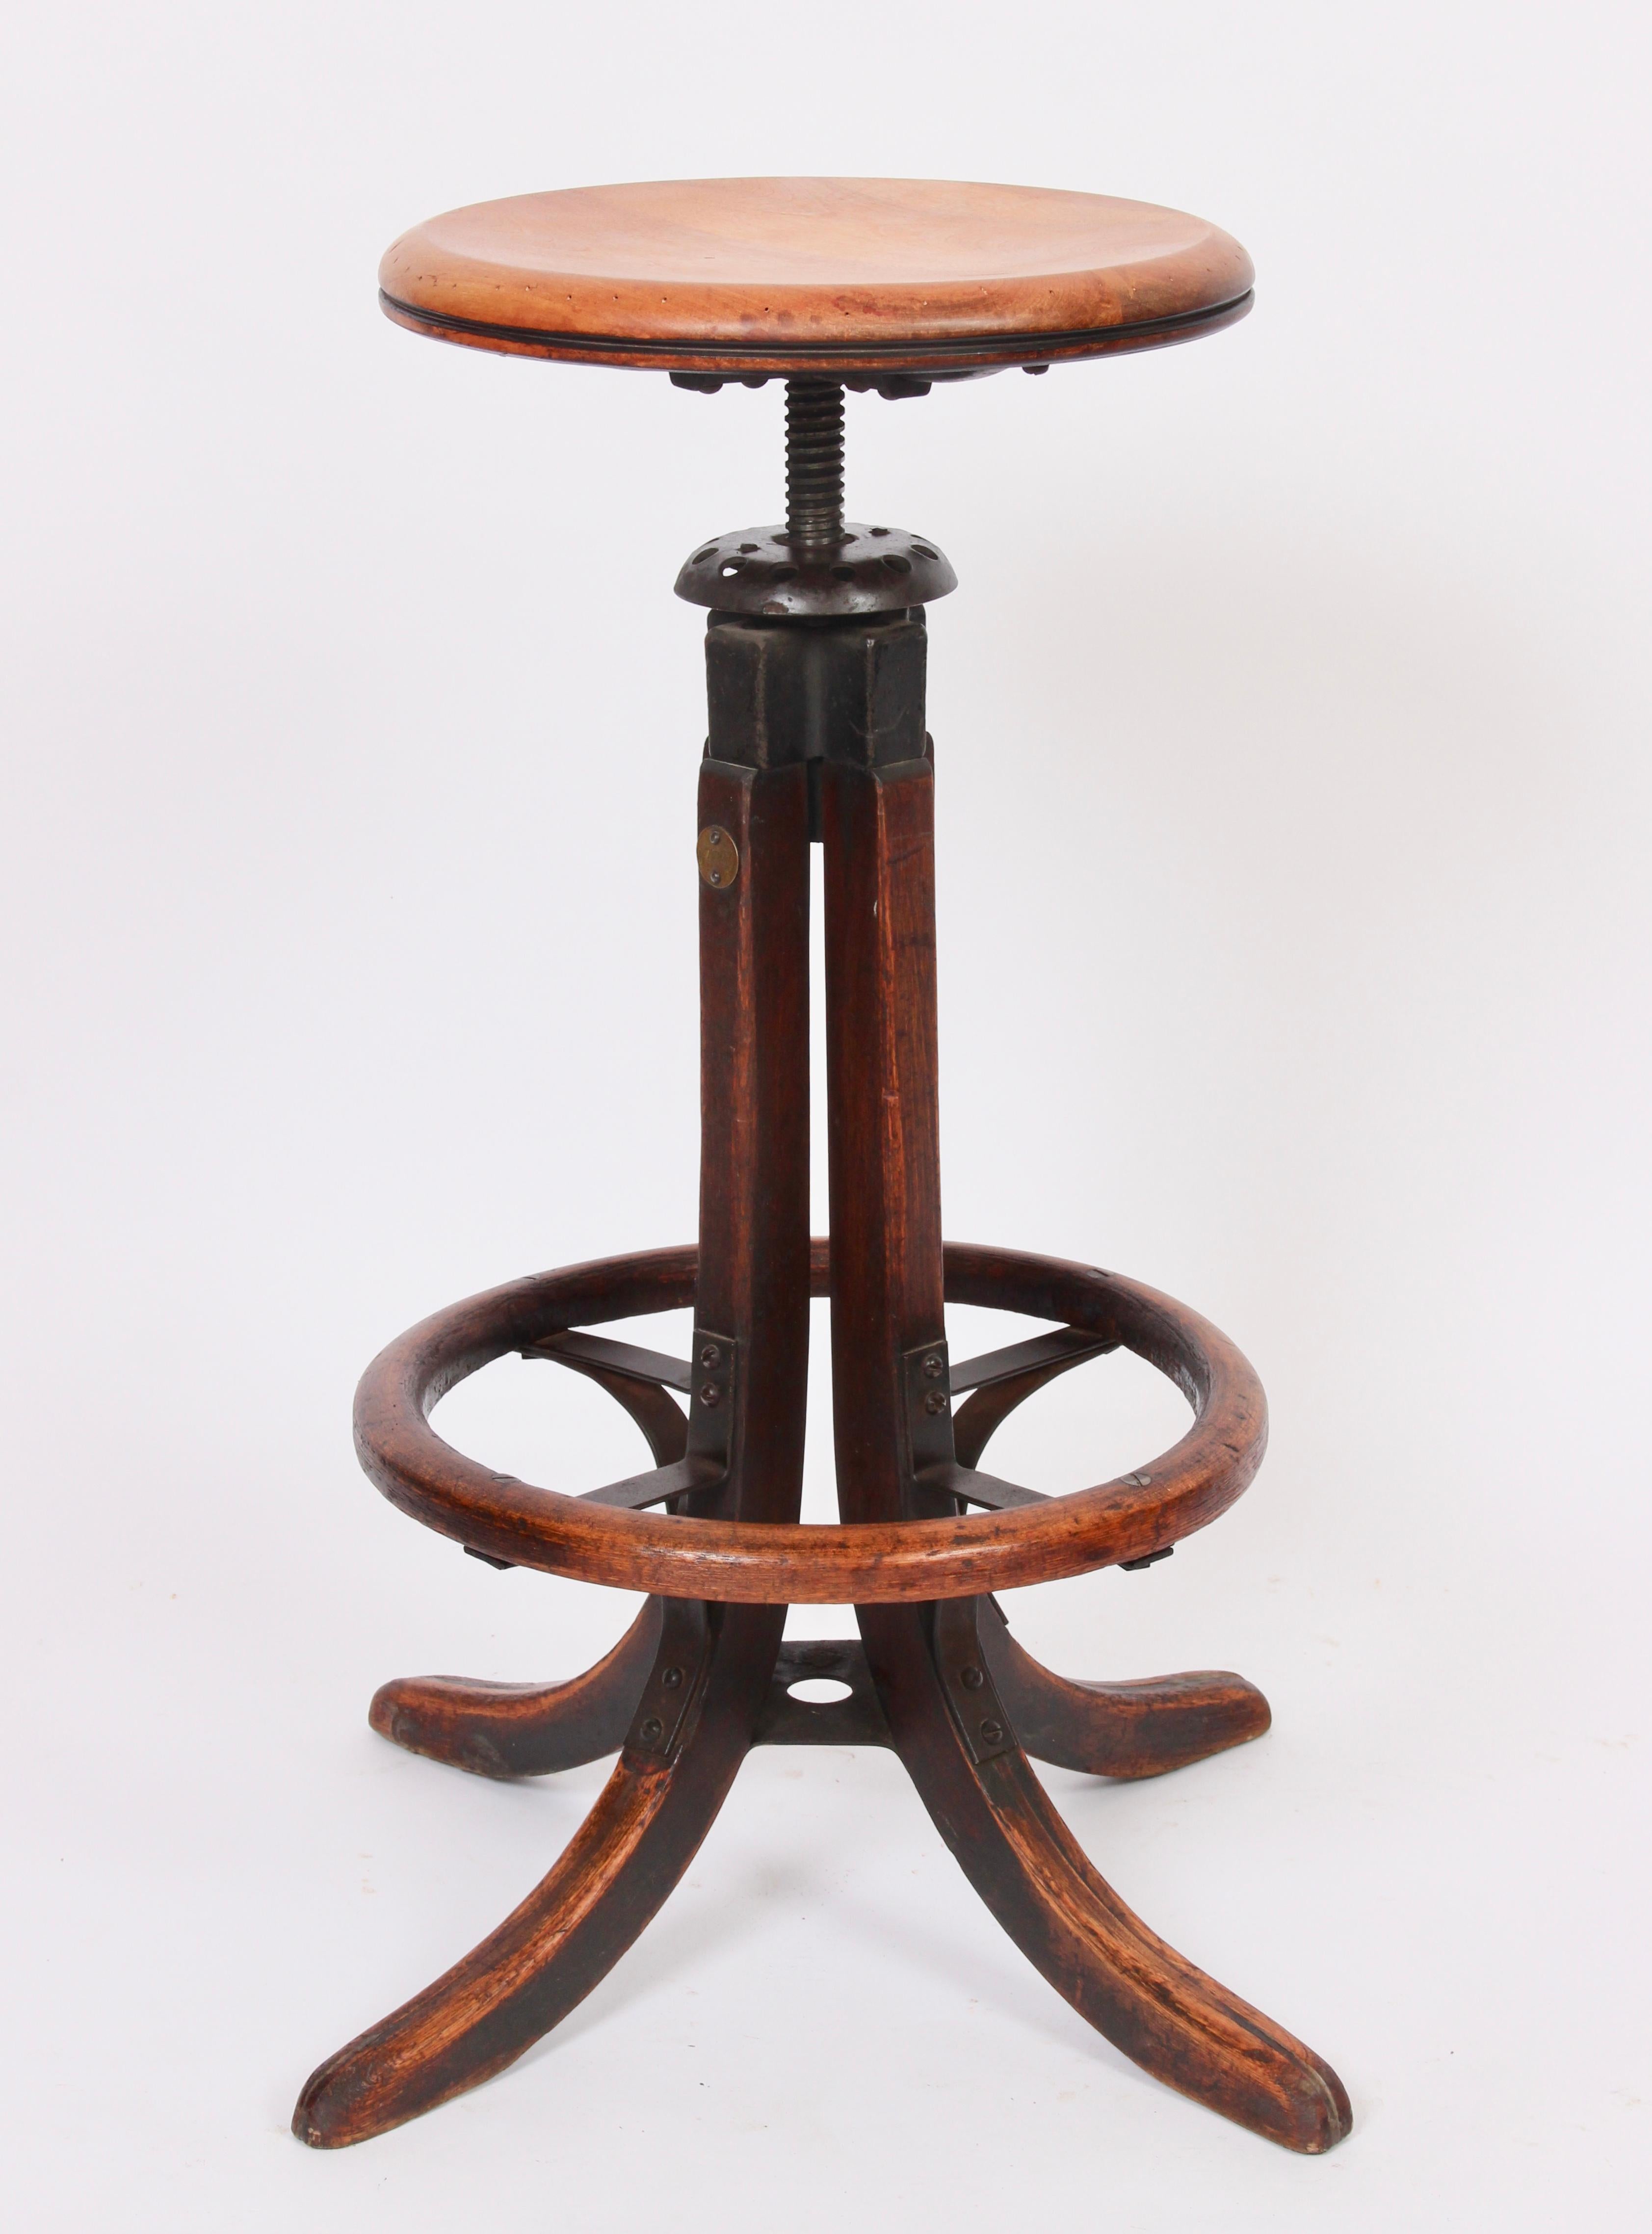 Industrial early 20th century adjustable height oak and iron architects, artists swivel stool. Featuring a sturdy reinforced splayed four-legged oak base, original circular oak heel ring also reinforced with metal bracing, refinished and varnished